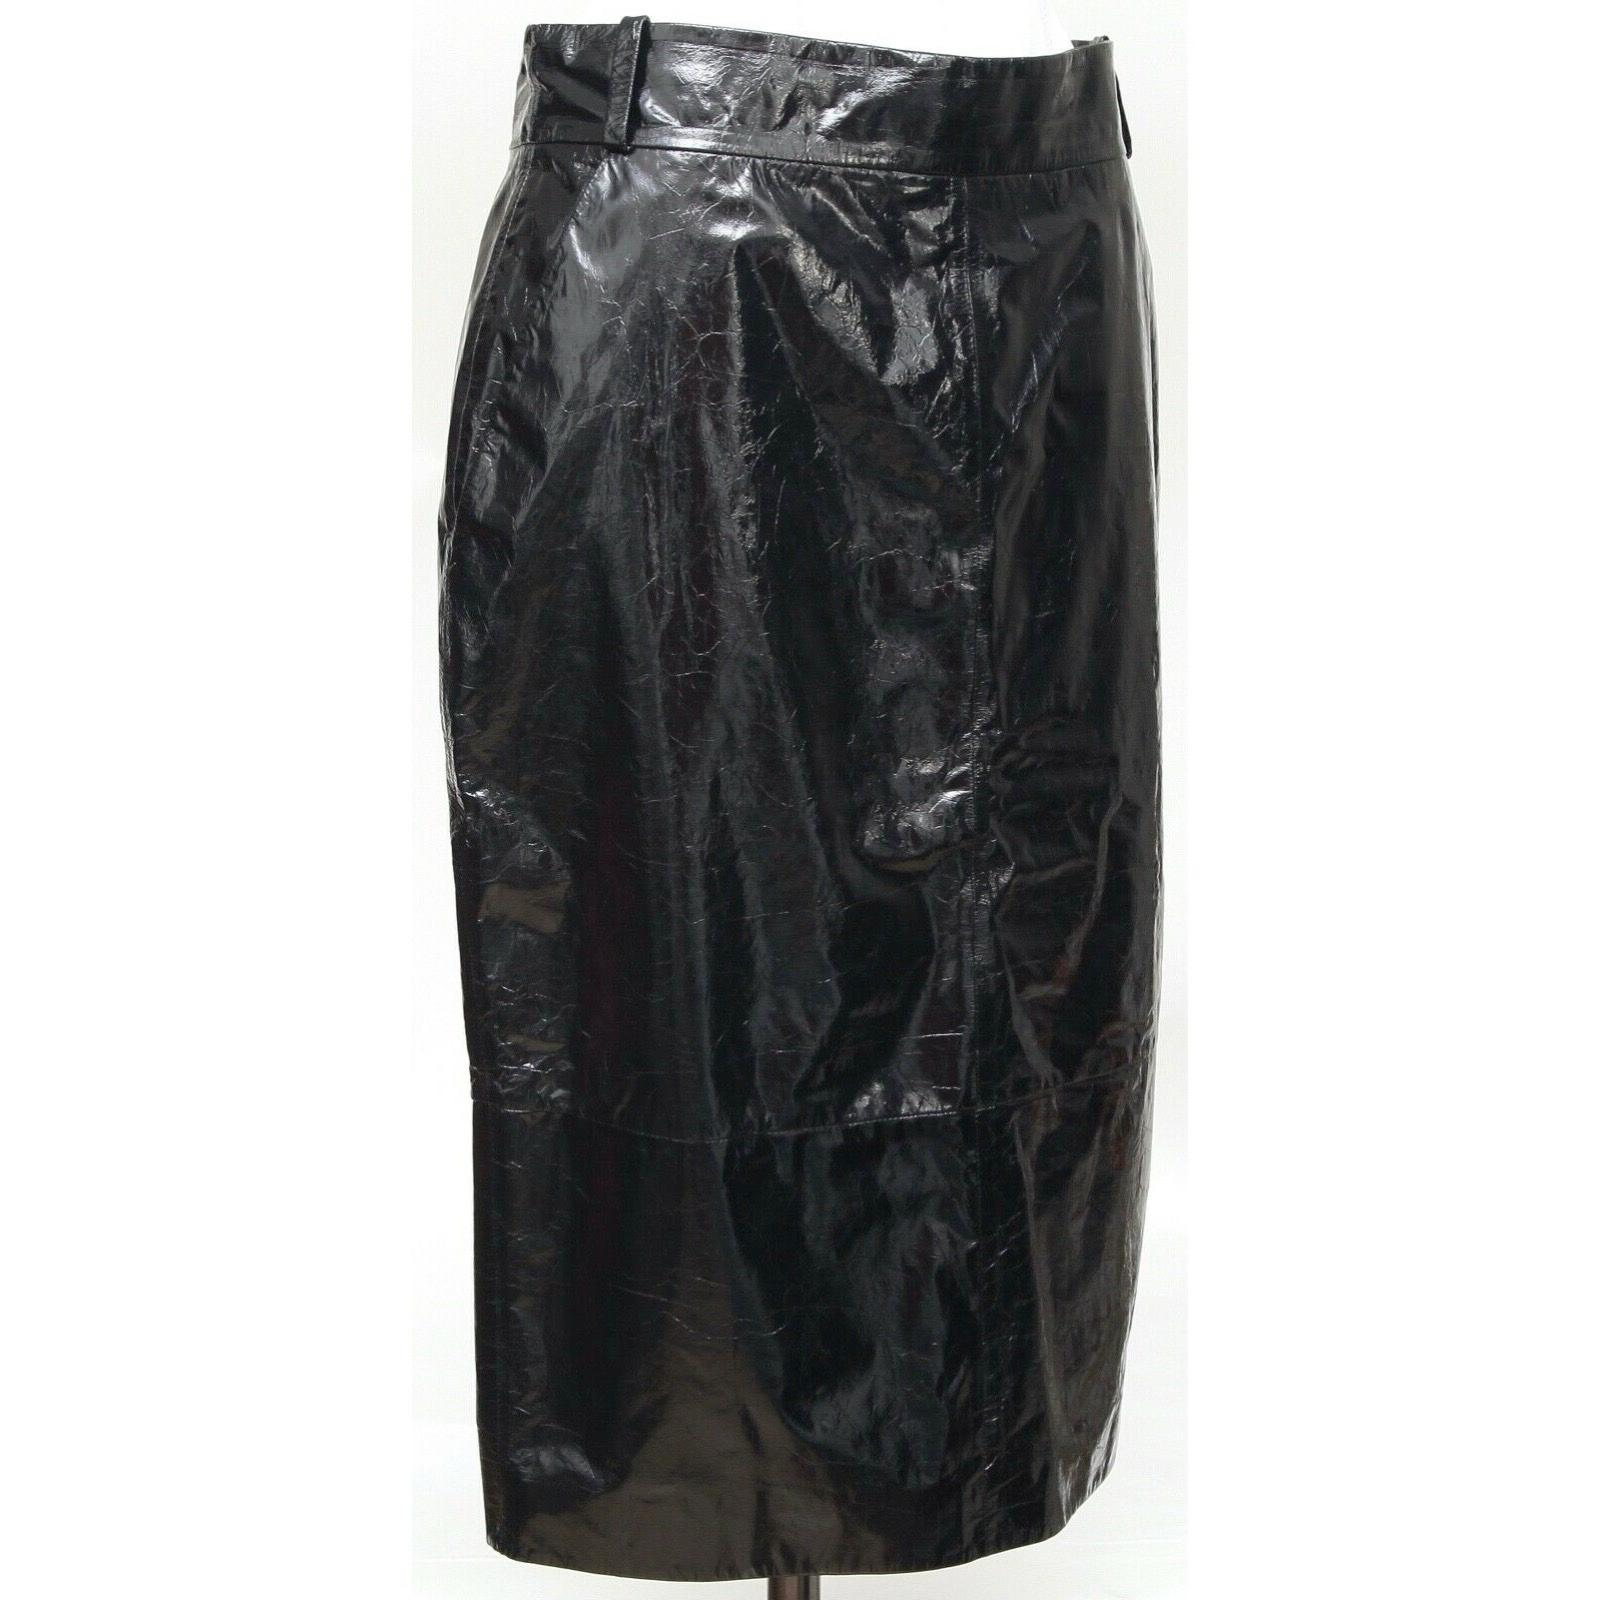 GUARANTEED AUTHENTIC CHANEL 2016 COLLECTION BLACK LEATHER SKIRT

Design:
- Black lightweight textured leather skirt from the Rome Collection.
- Pencil silhouette.
- Inverted v-shape back vent.
- Front zipper closure.
- Belt loops.
- Gunmetal colored